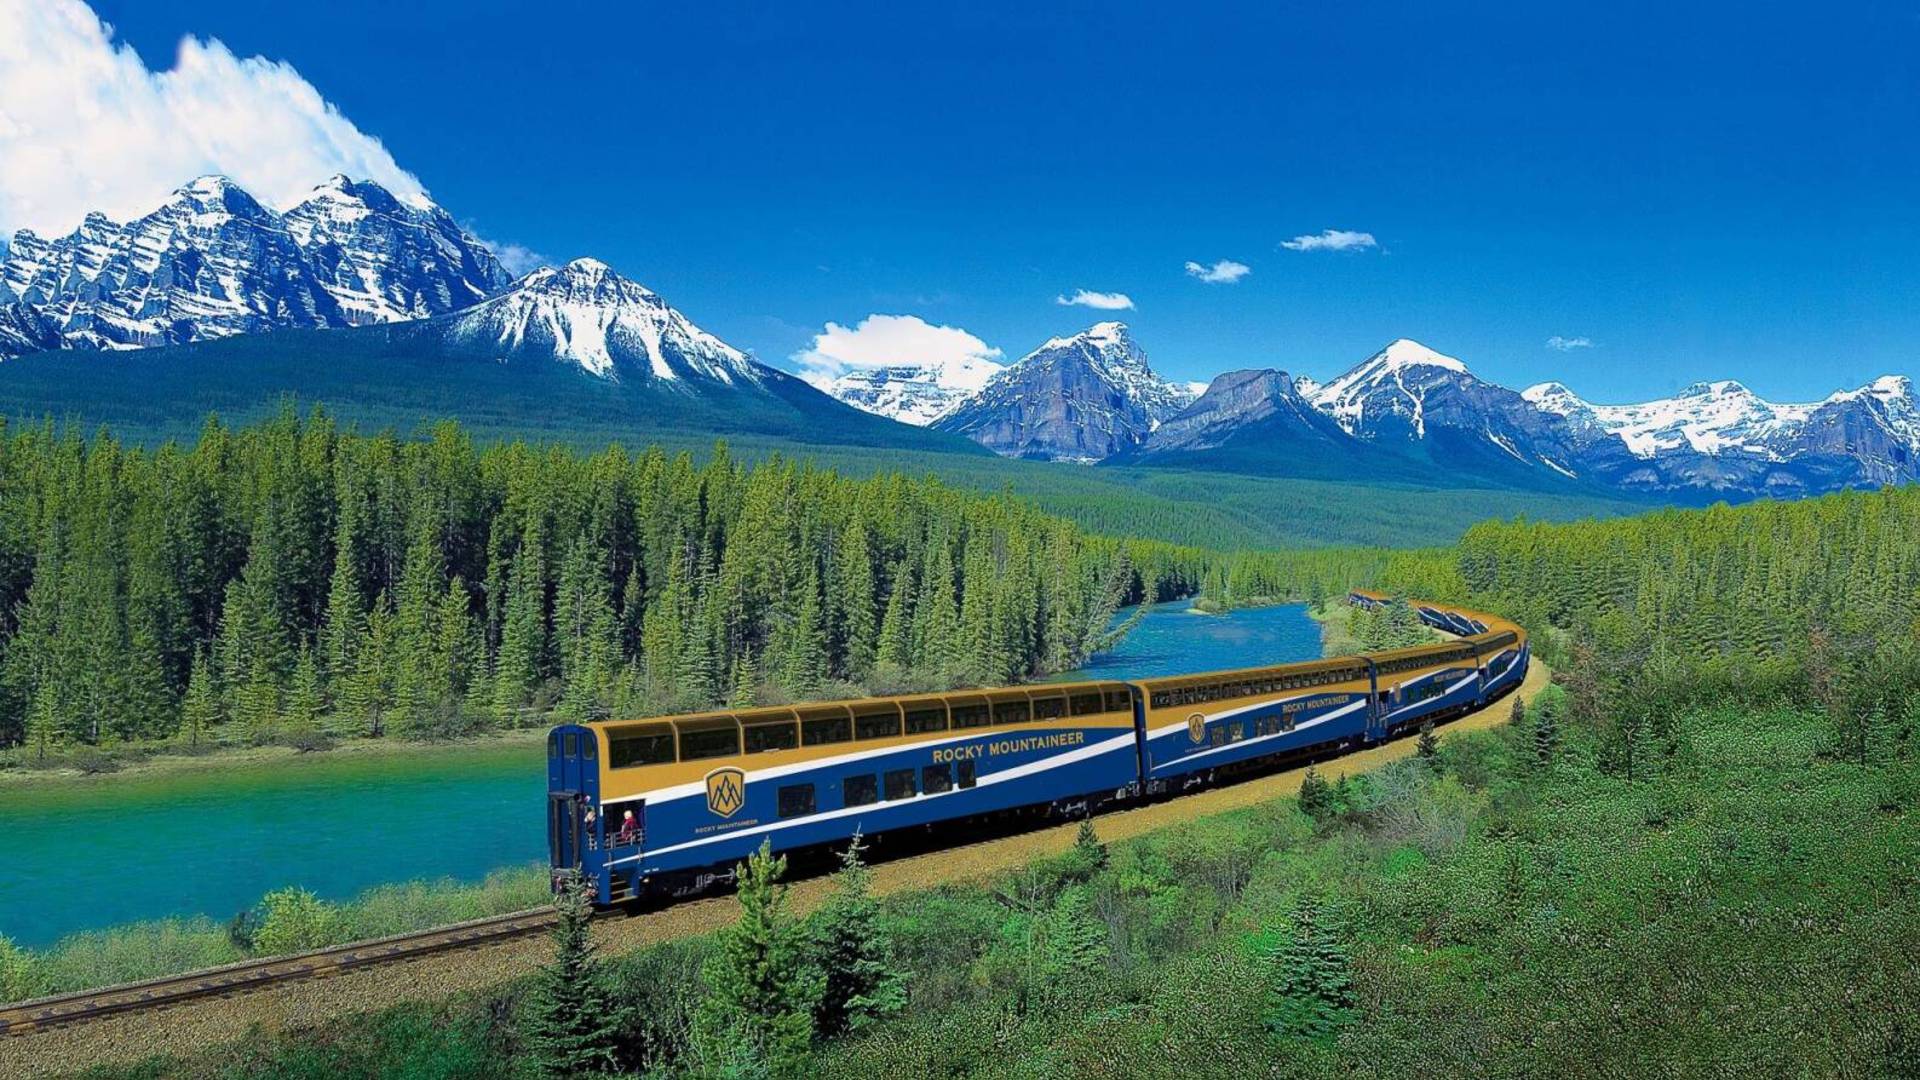 Scenic Train Journeys Around The World - A Spectacular Ride Through Nature's Masterpieces